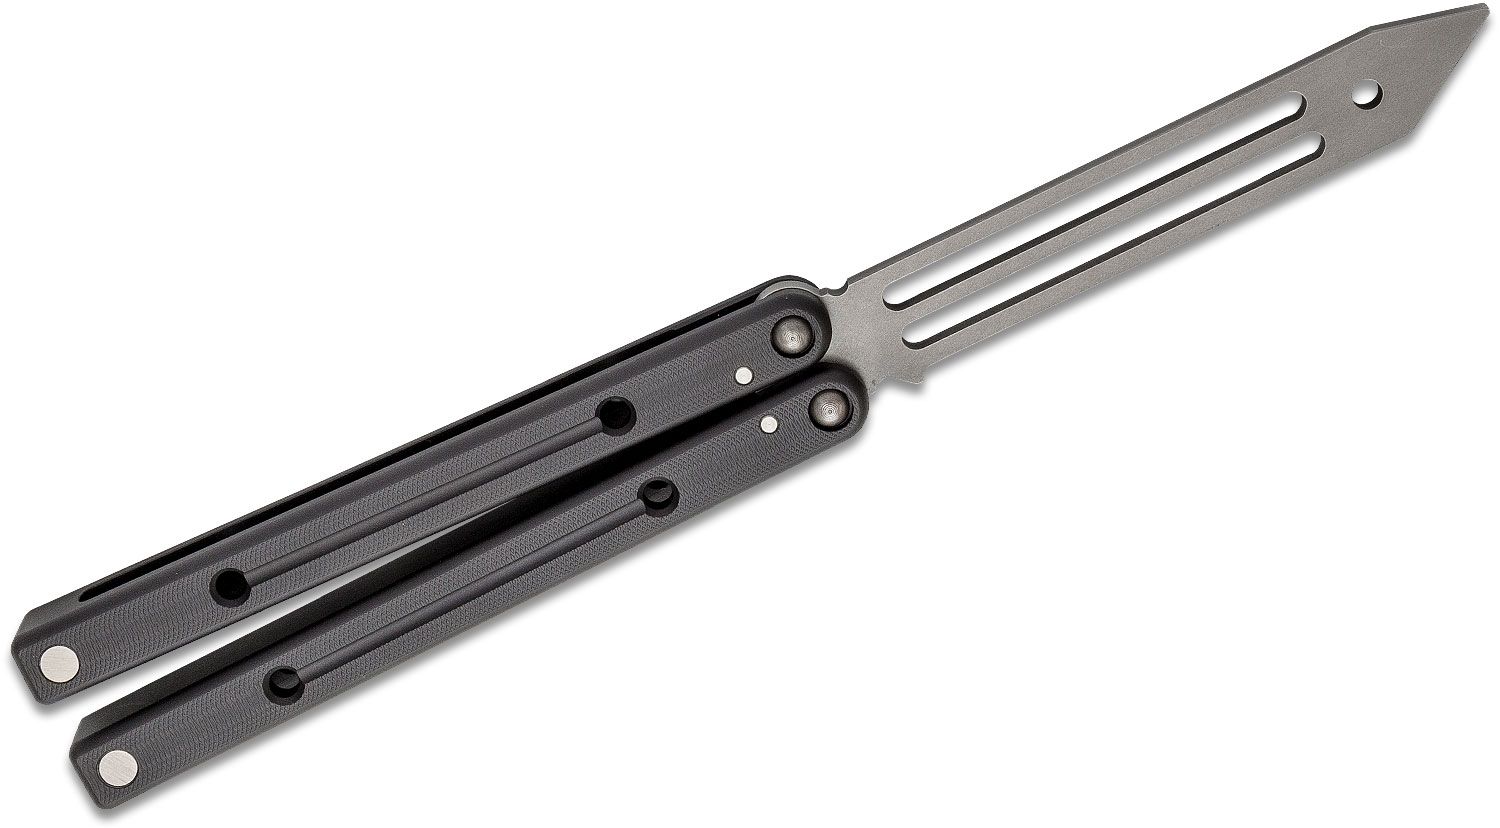 Squid Industries Squidtrainer V3.5 Balisong Butterfly Trainer 5.2 